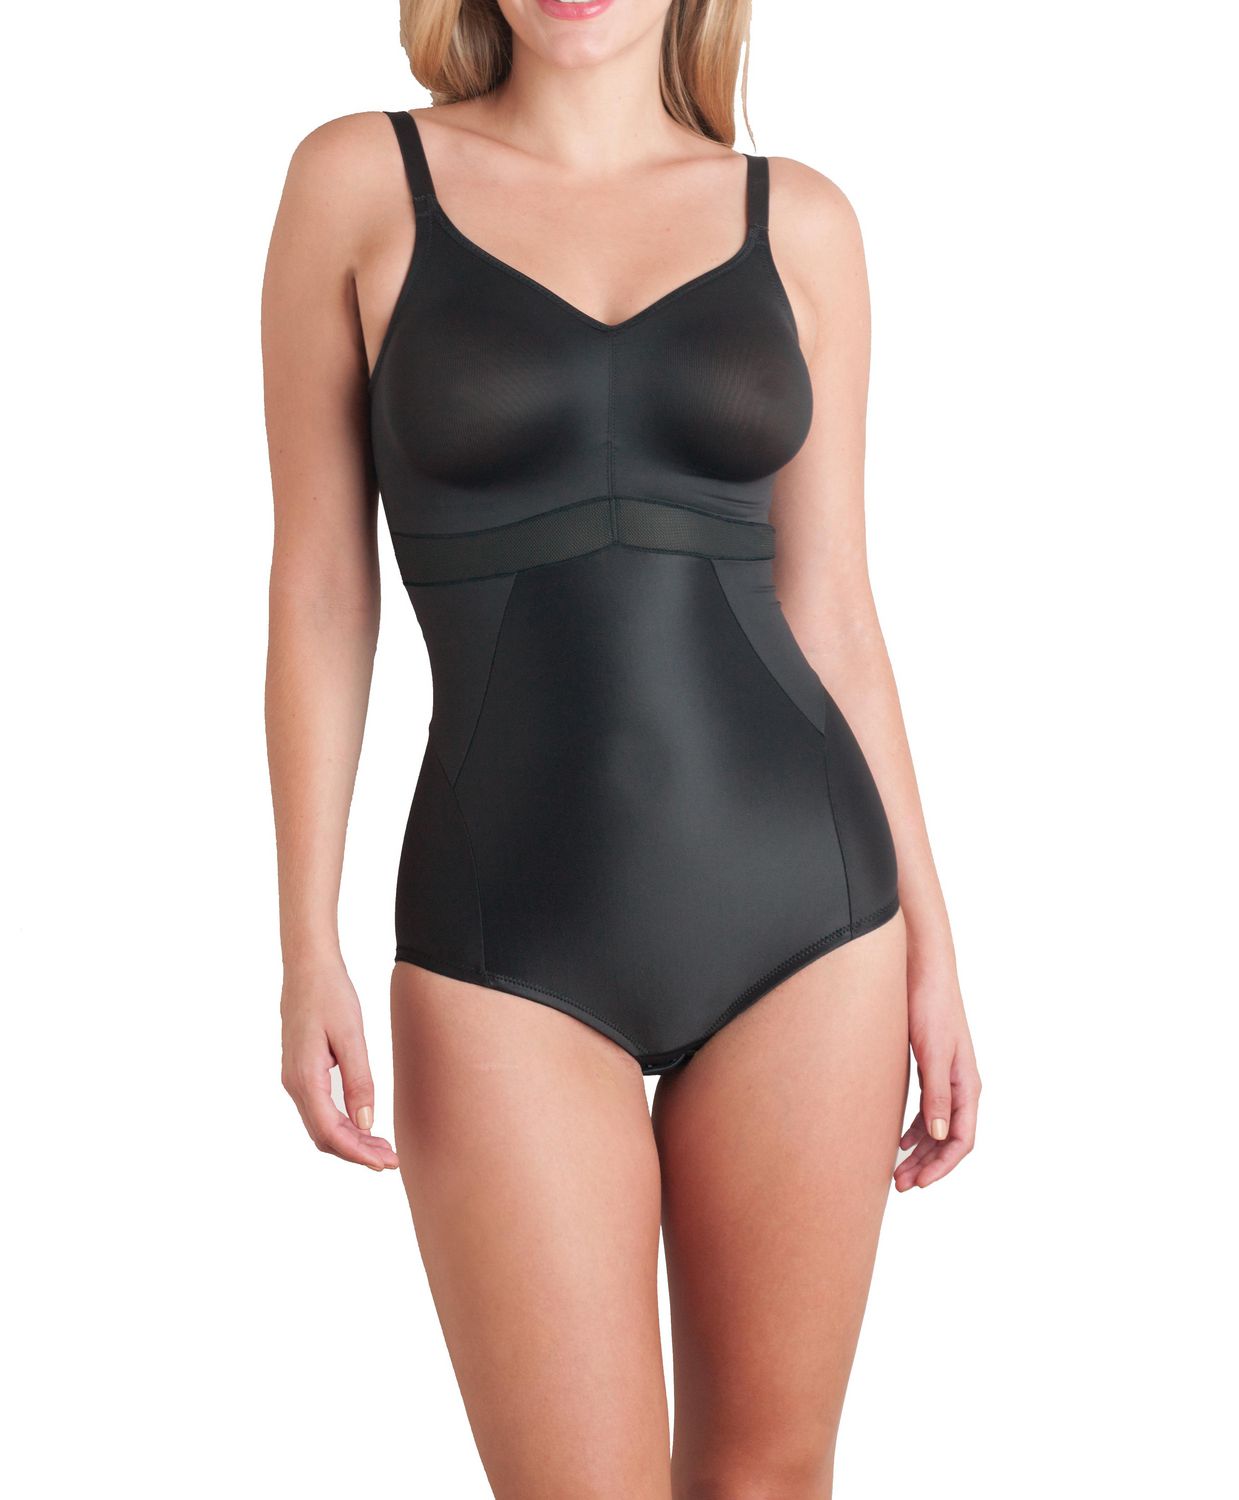 Women's Seamless Knitted Breathable & Antibacterial Body Shaper